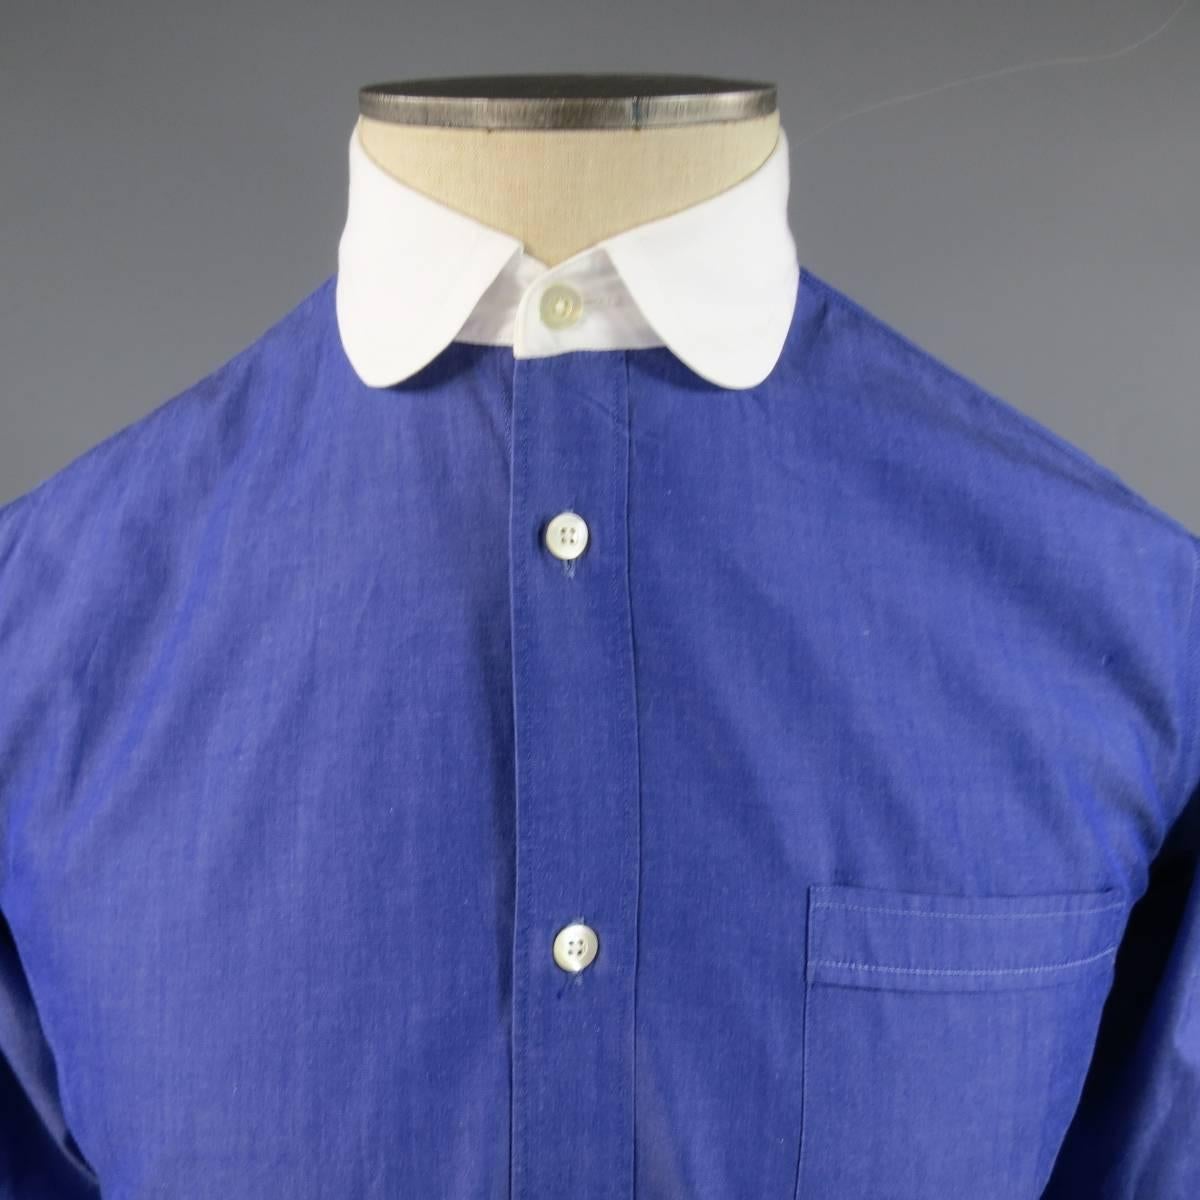 Classic JUNYA WATANABE Comme des Garcons MAN shirt in a light navy blue sharkskin sheen cotton featuring a white contrast club collar and cuffs. Made in Japan.
 
Excellent Pre-Owned Condition.
Marked: S
 
Measurements:
 
Shoulder: 16